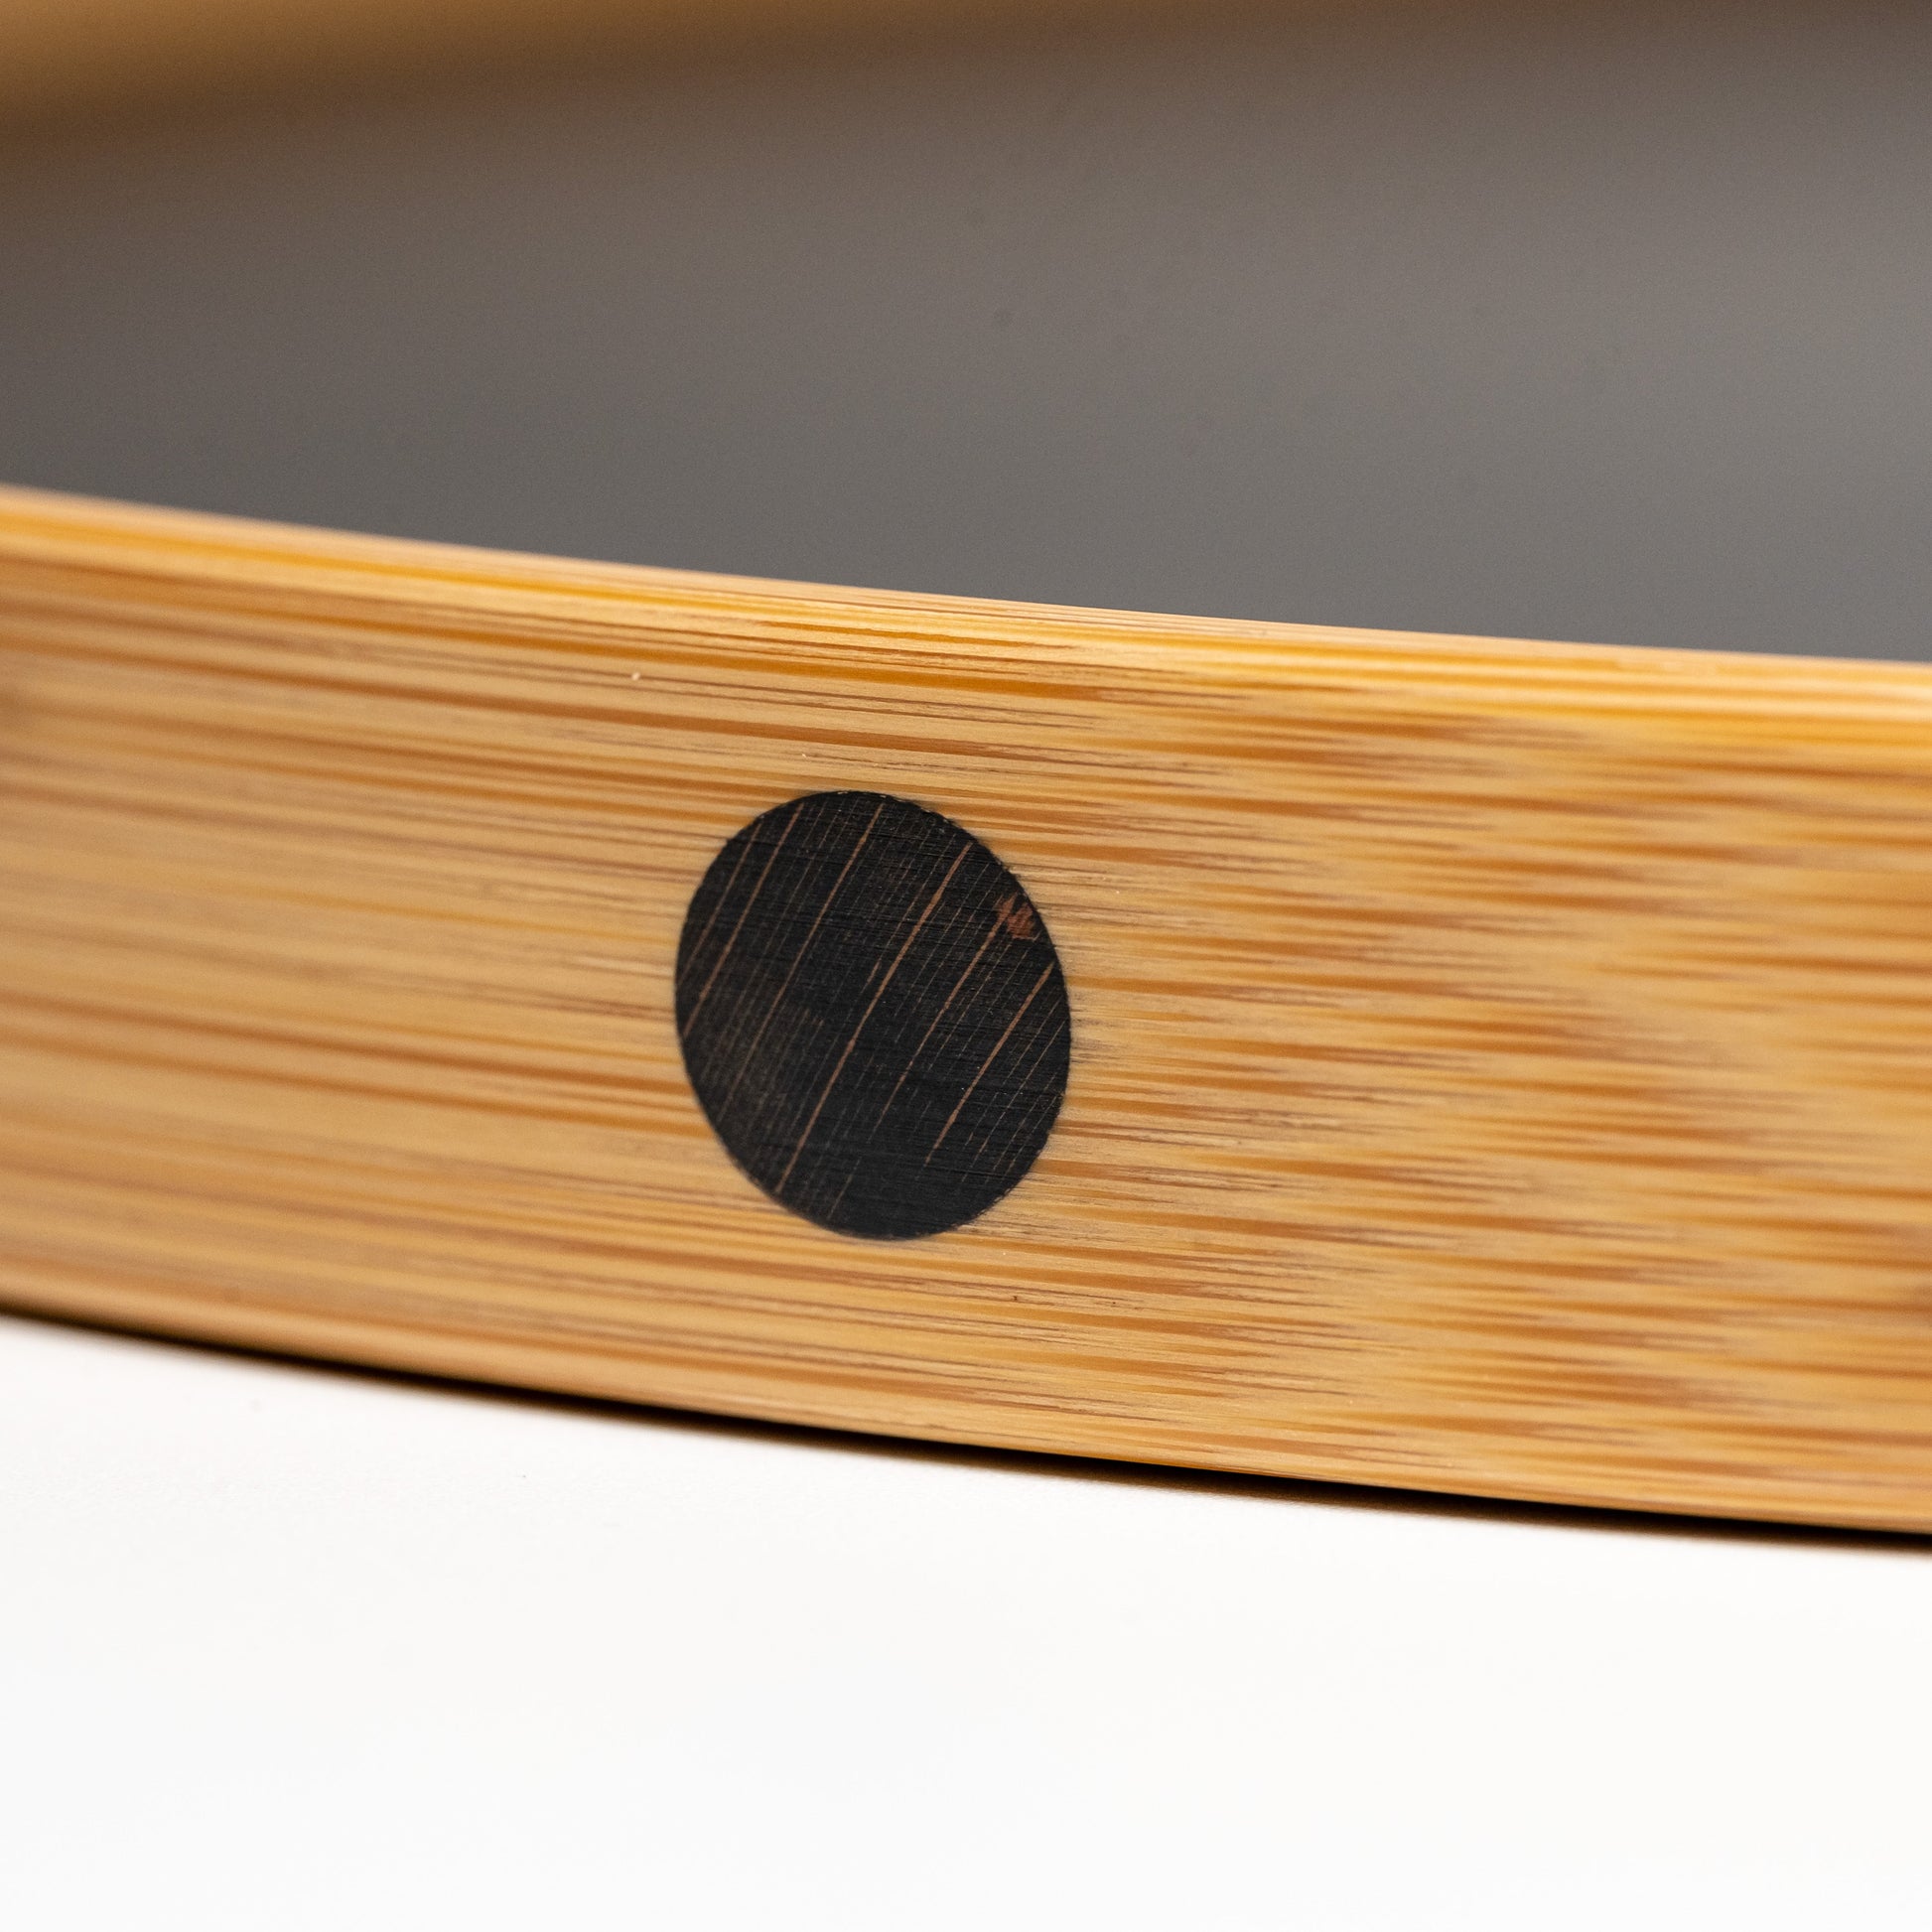 A close up of a Copenhagen series bamboo tray on a white background